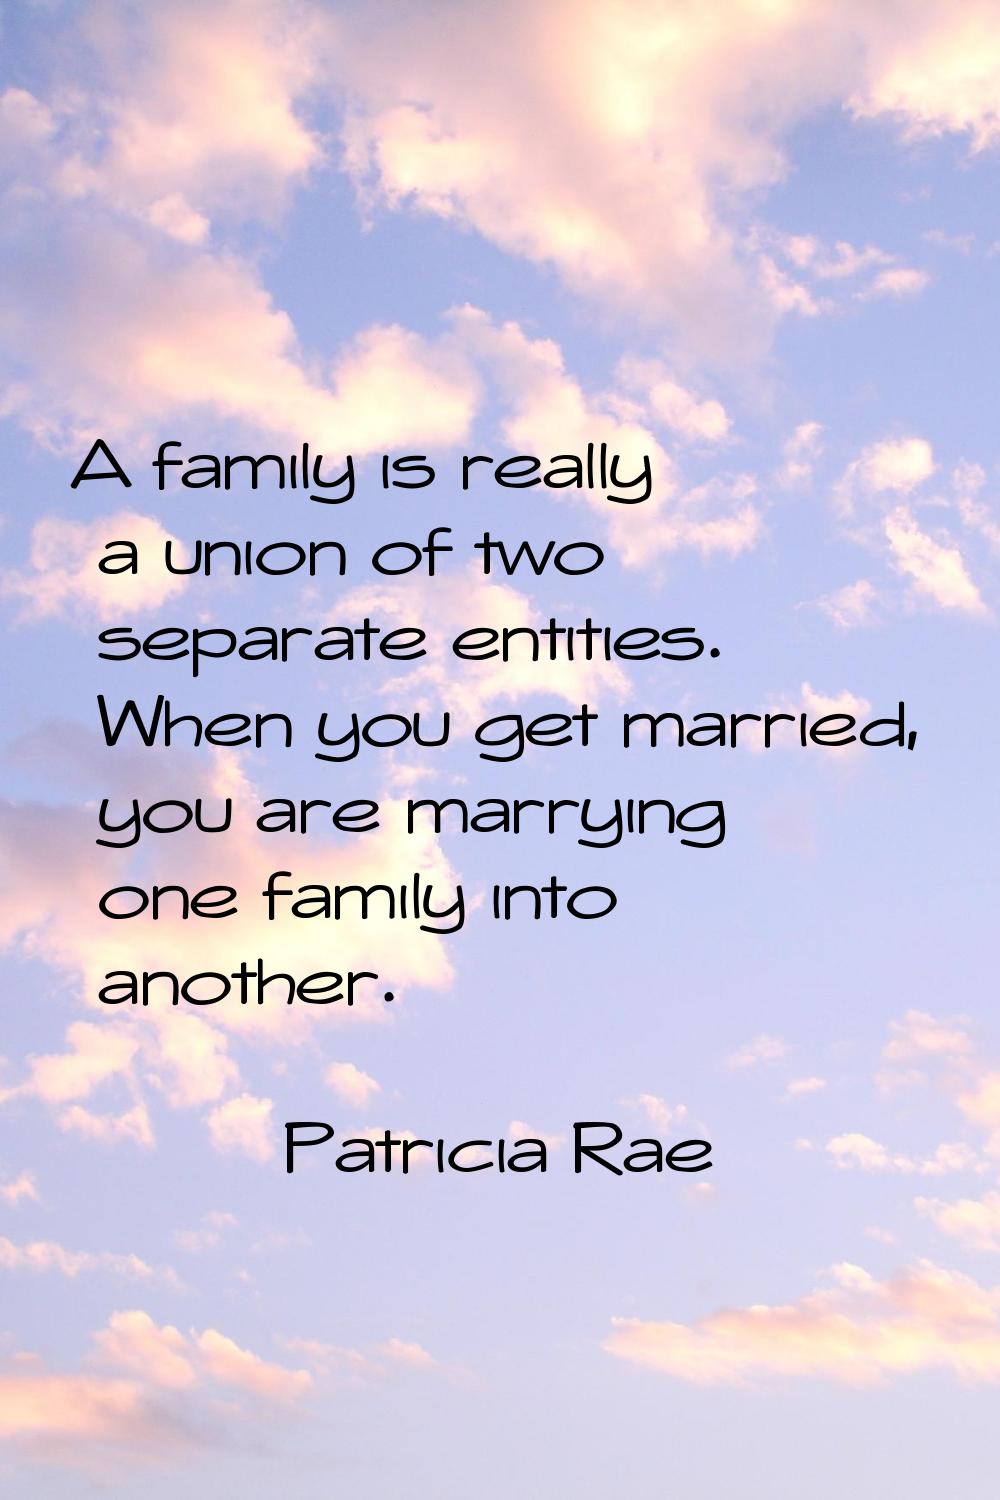 A family is really a union of two separate entities. When you get married, you are marrying one fam